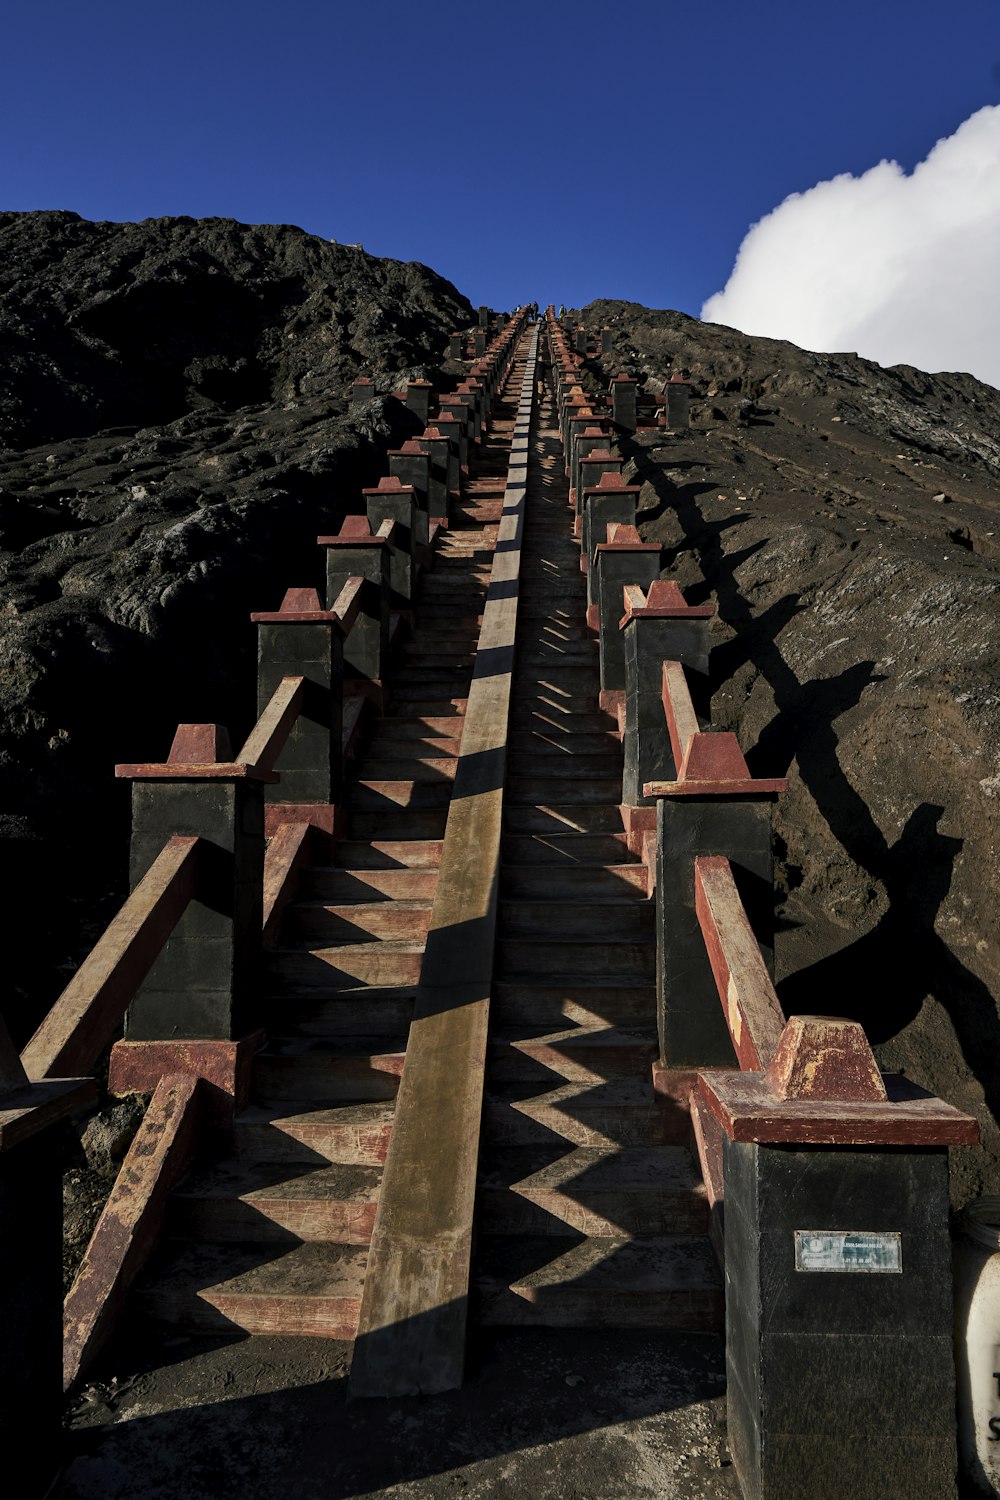 a train track going up a mountain side